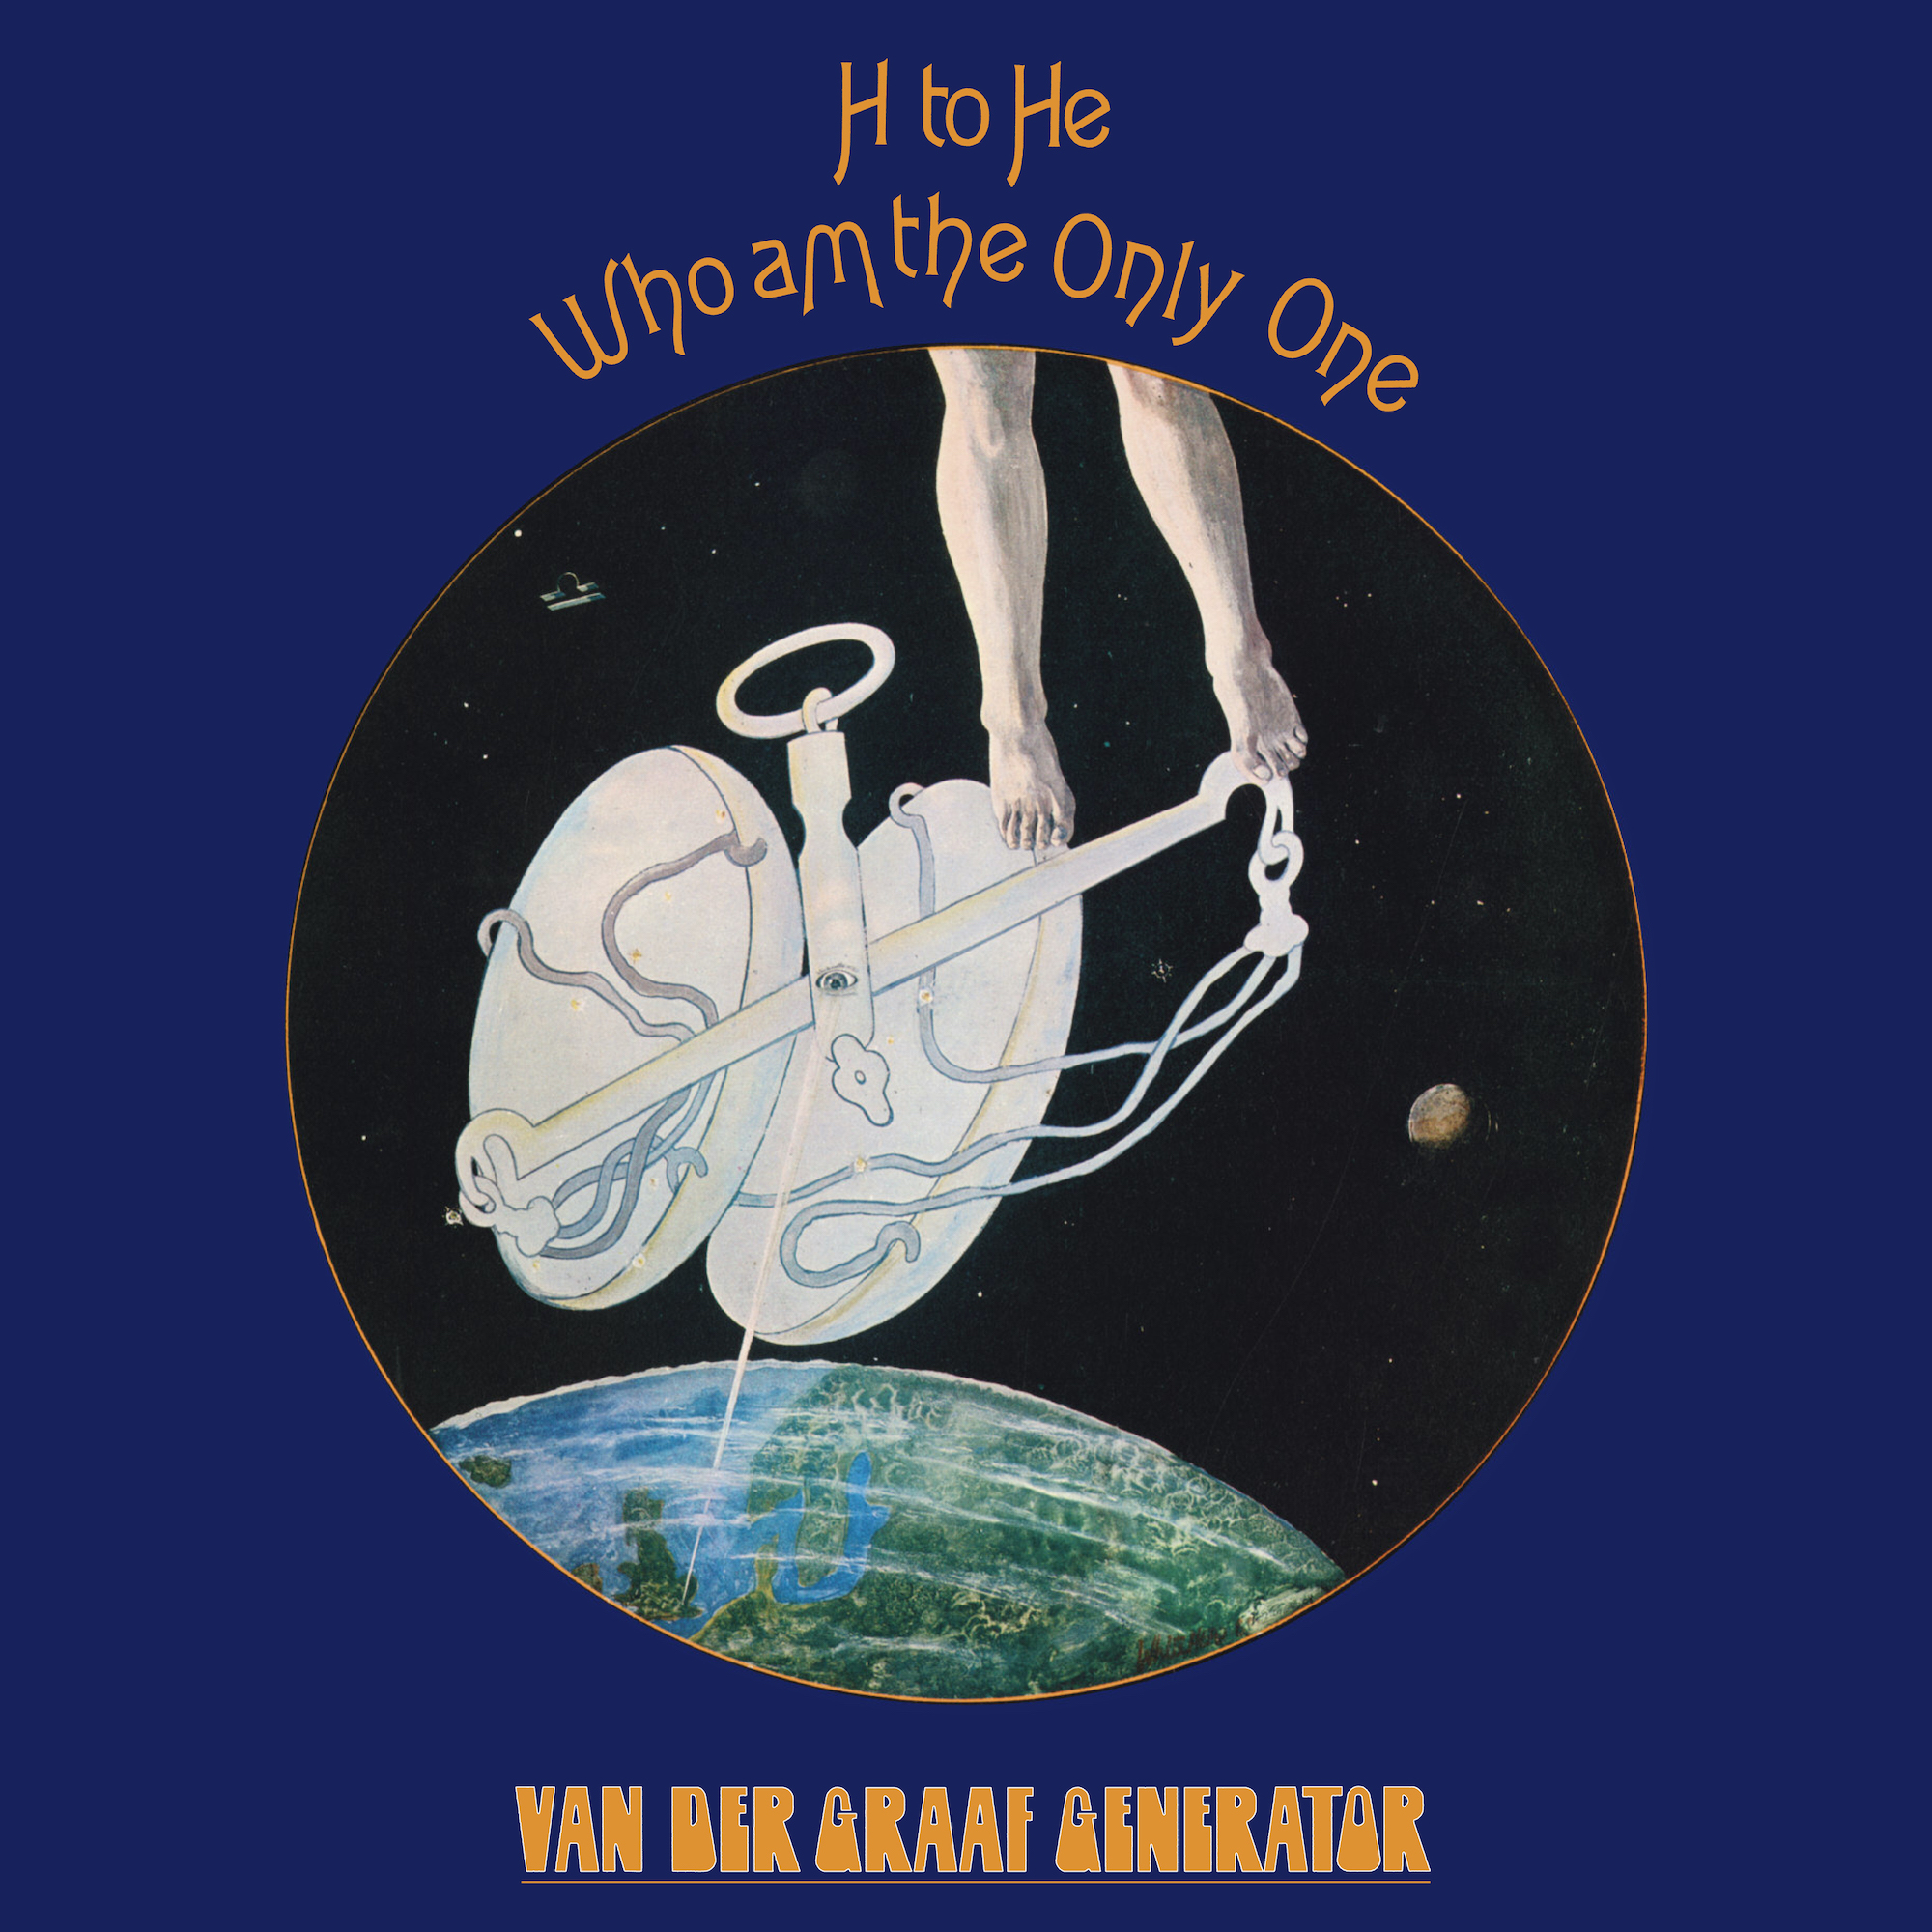 Qu'écoutez-vous en ce moment ? - Page 6 Van-der-graaf-generator_h-to-he-who-am-the-only-one_2cd_dvd_2